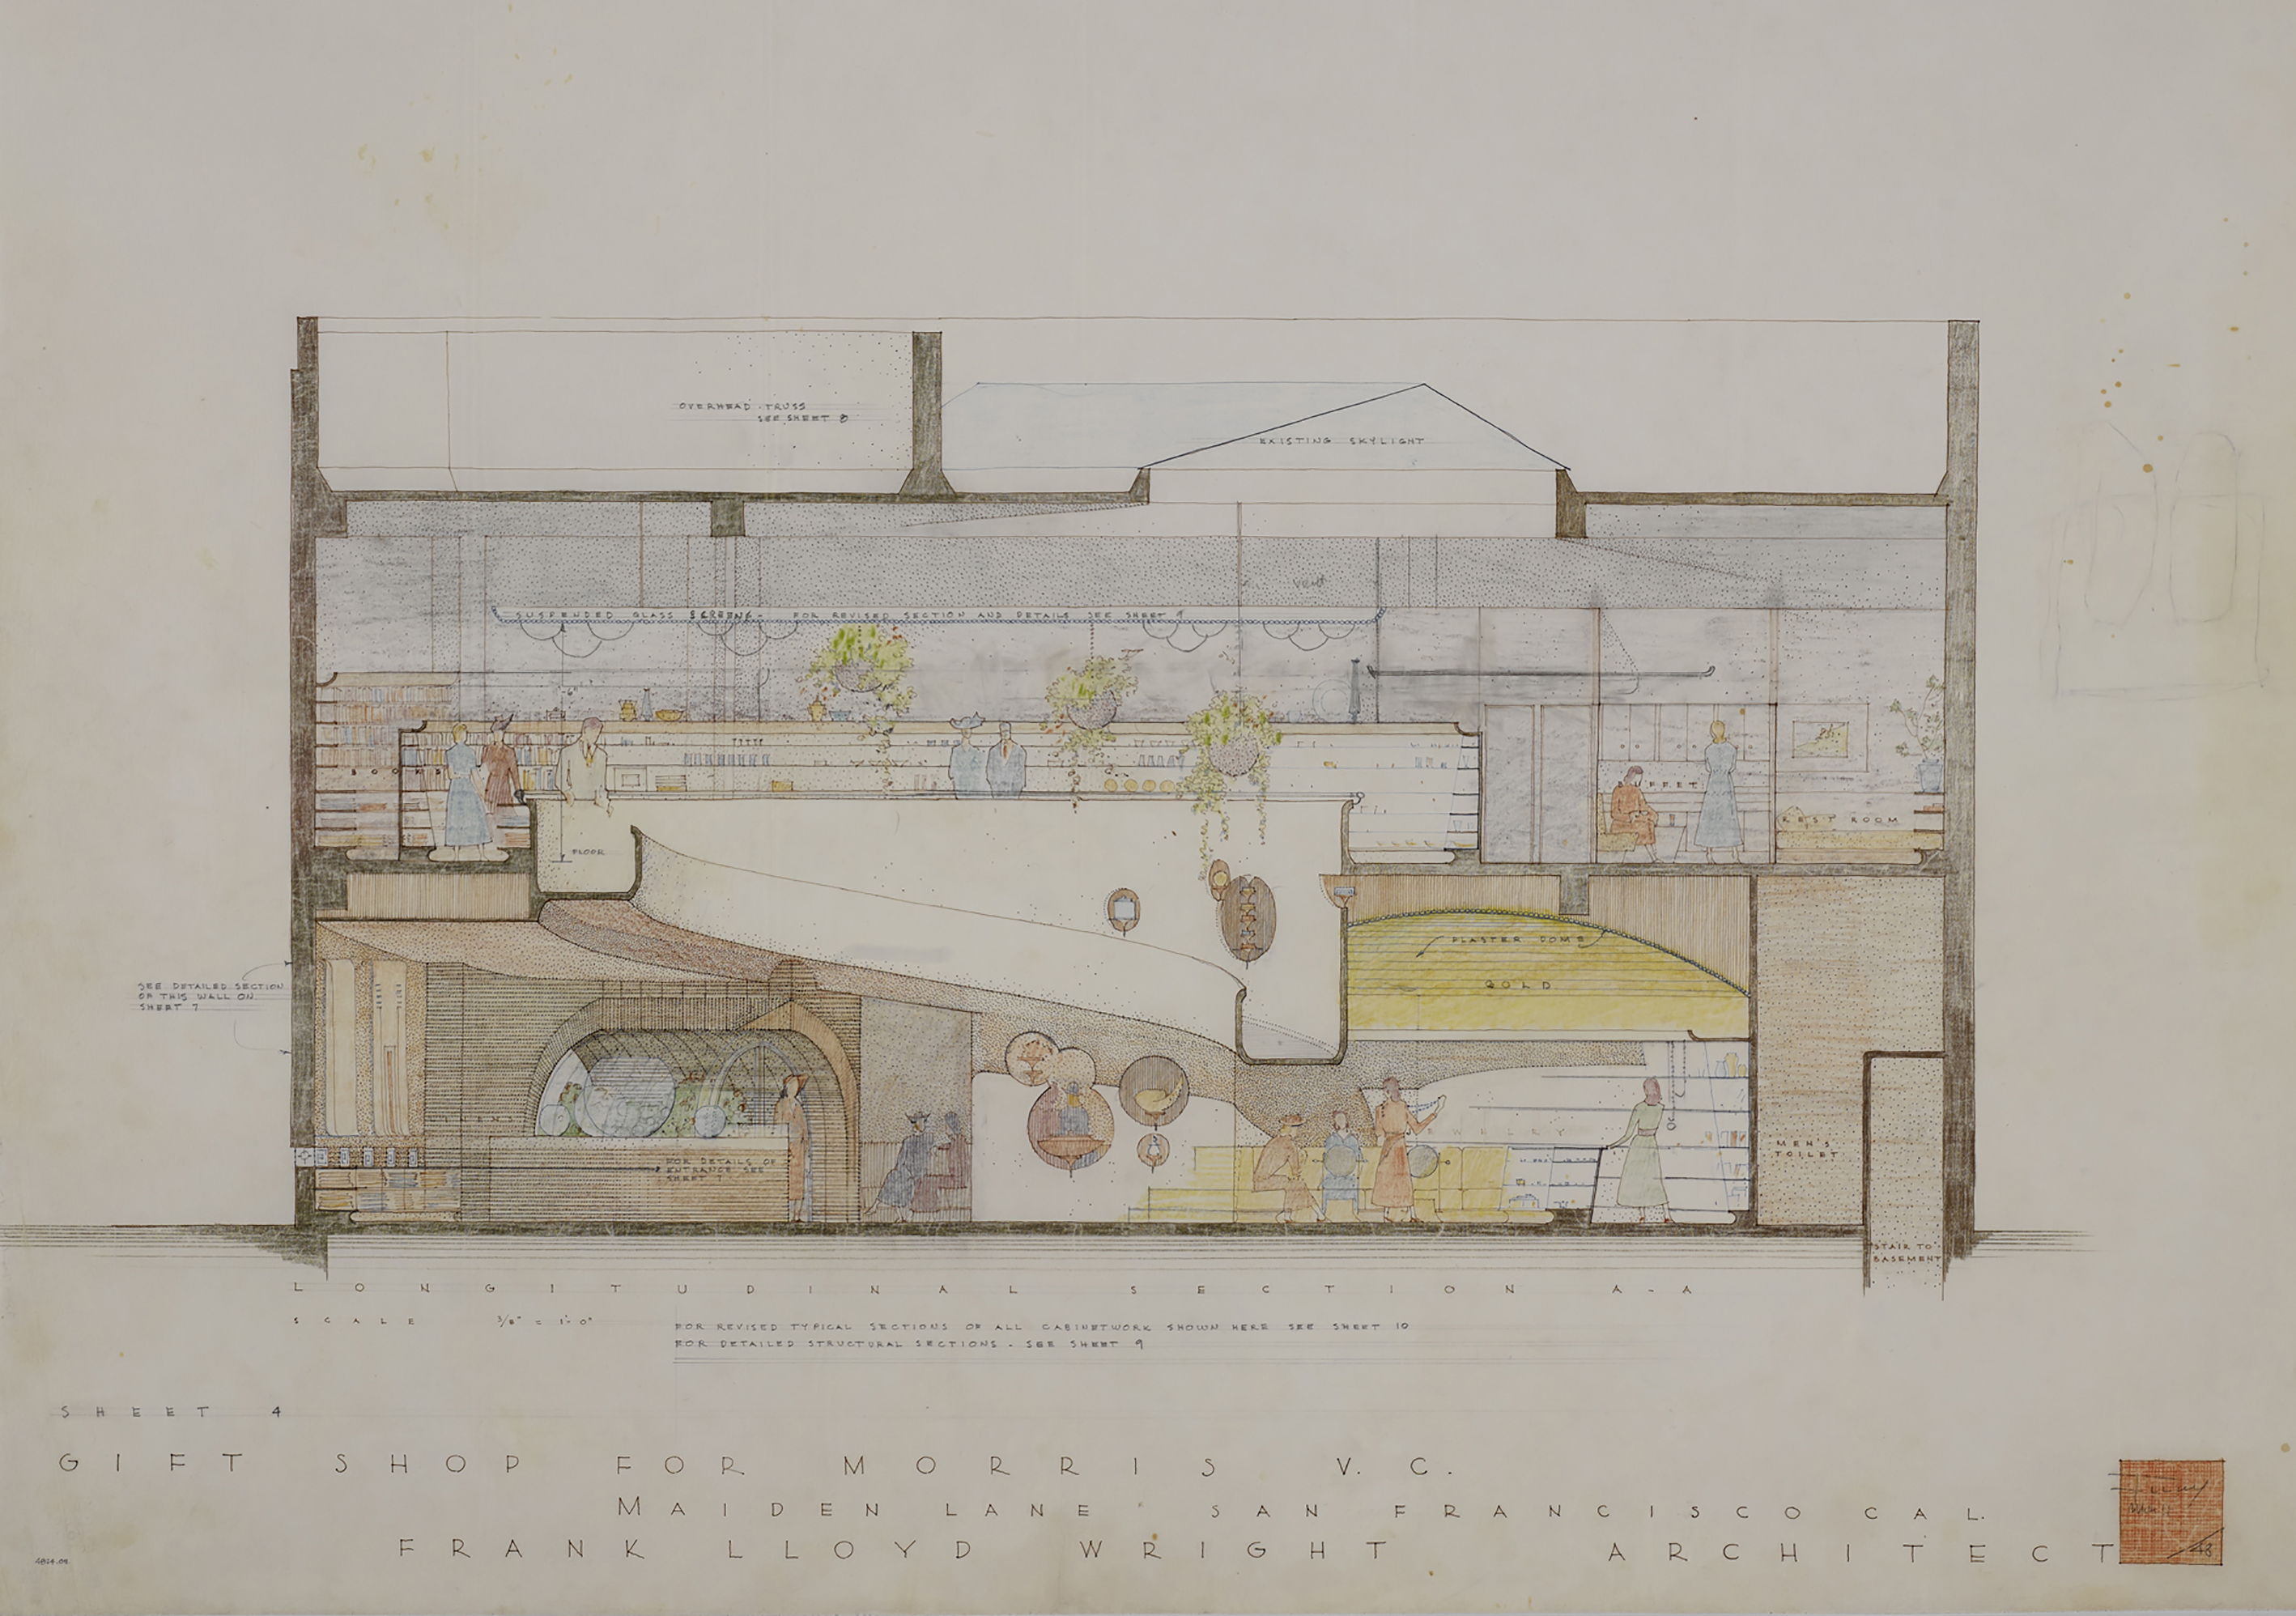 Frank Lloyd Wright Drawings and a Theatre  Canadian Art Junkie